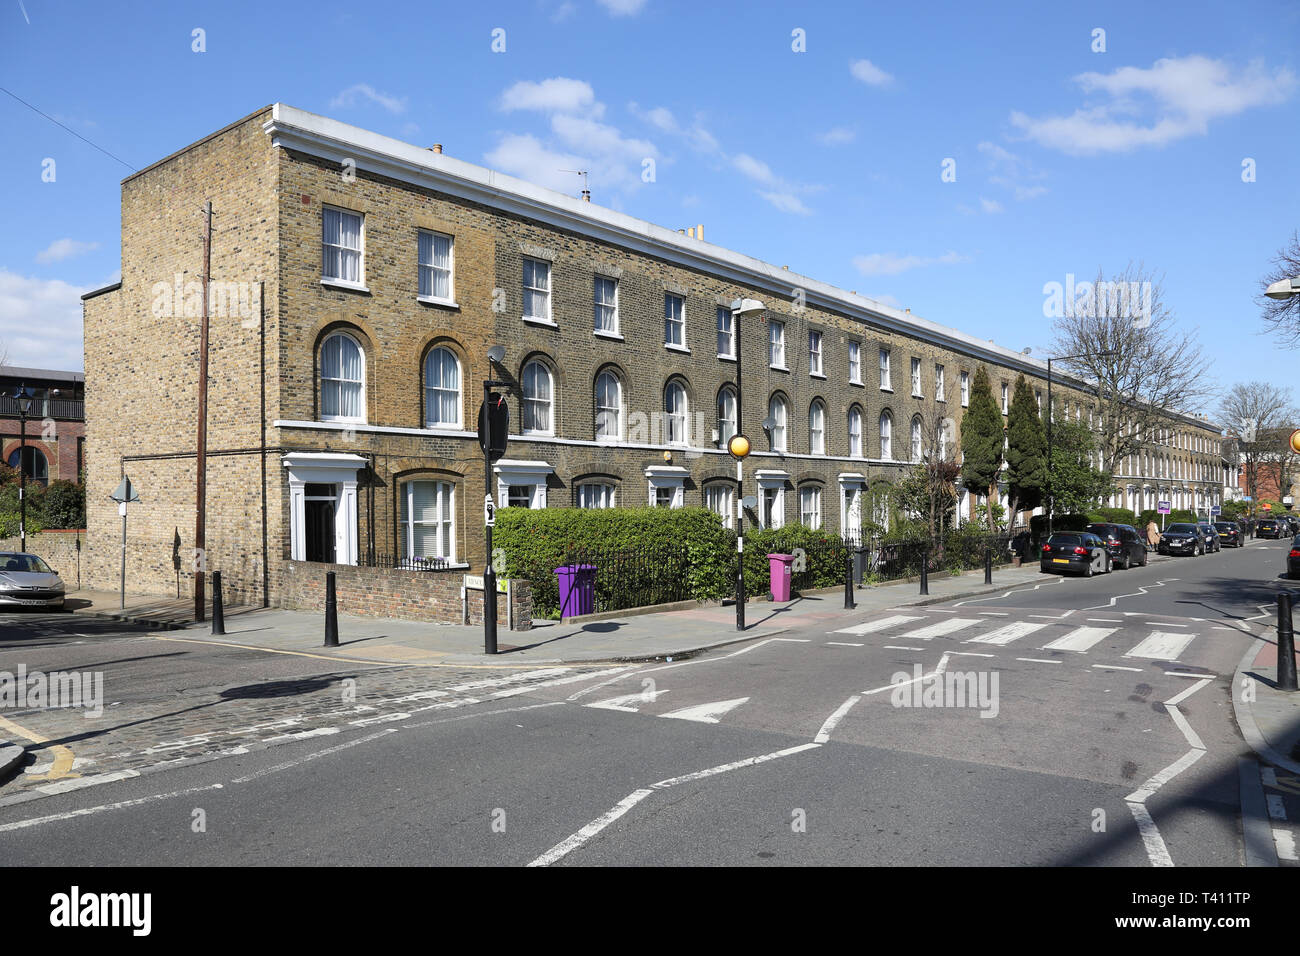 Elegant terrace of Georgian houses on Campbell Road, Bow, in London's East end. Traditionally a poor area, now highly desirable. Stock Photo